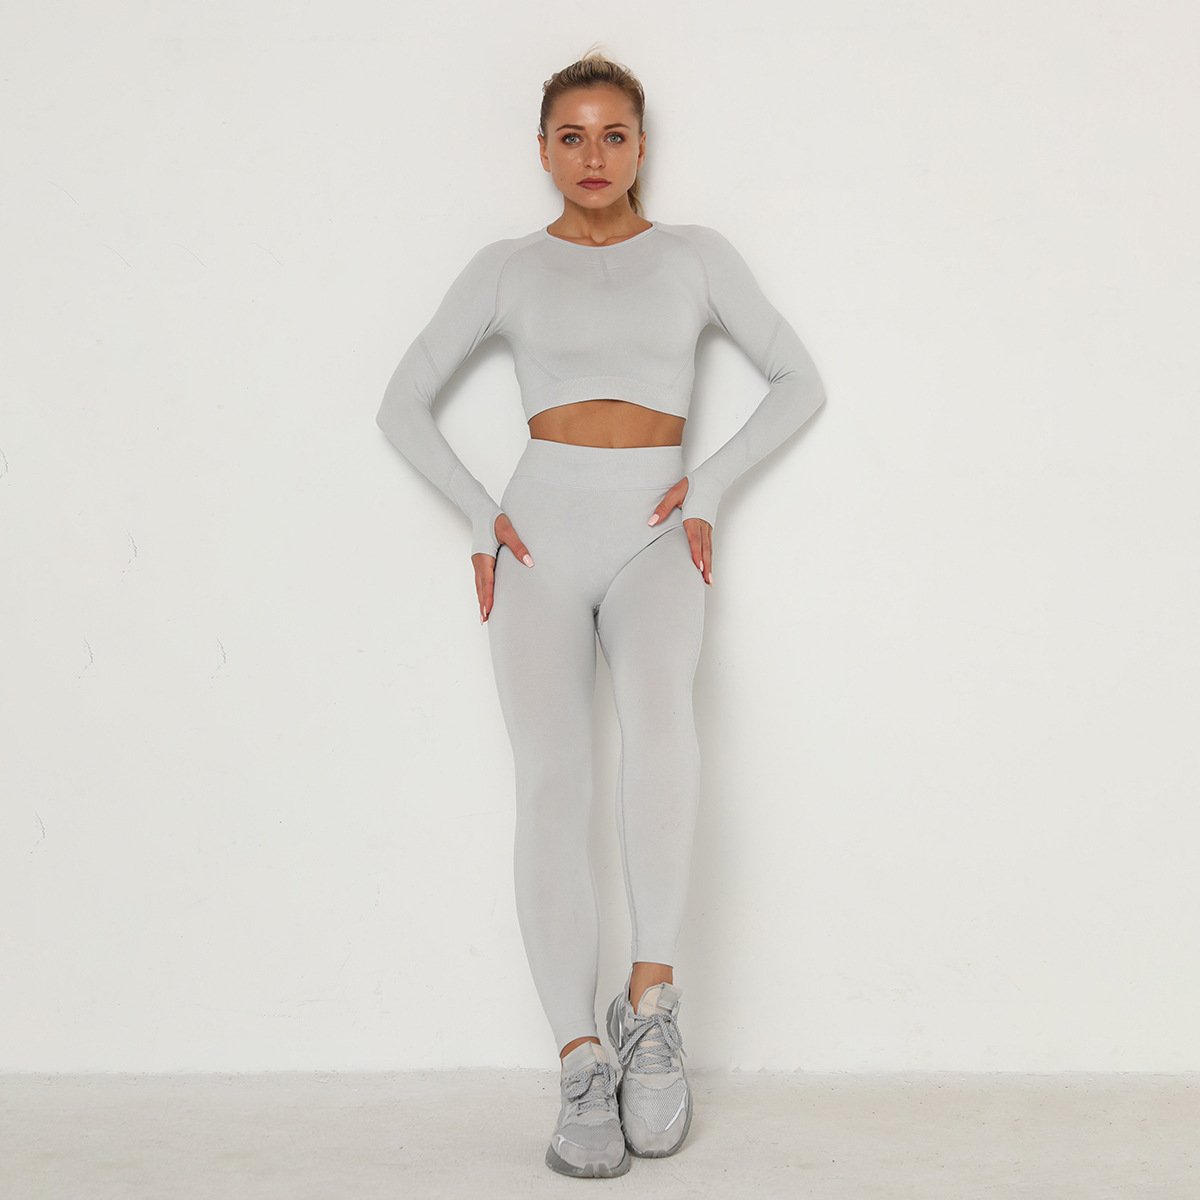 Women Seamless Gym set Fitness Sports Suits GYM Cloth Long Sleeve Shirts High Waist Running Sexy Booty Leggings Workout Pants